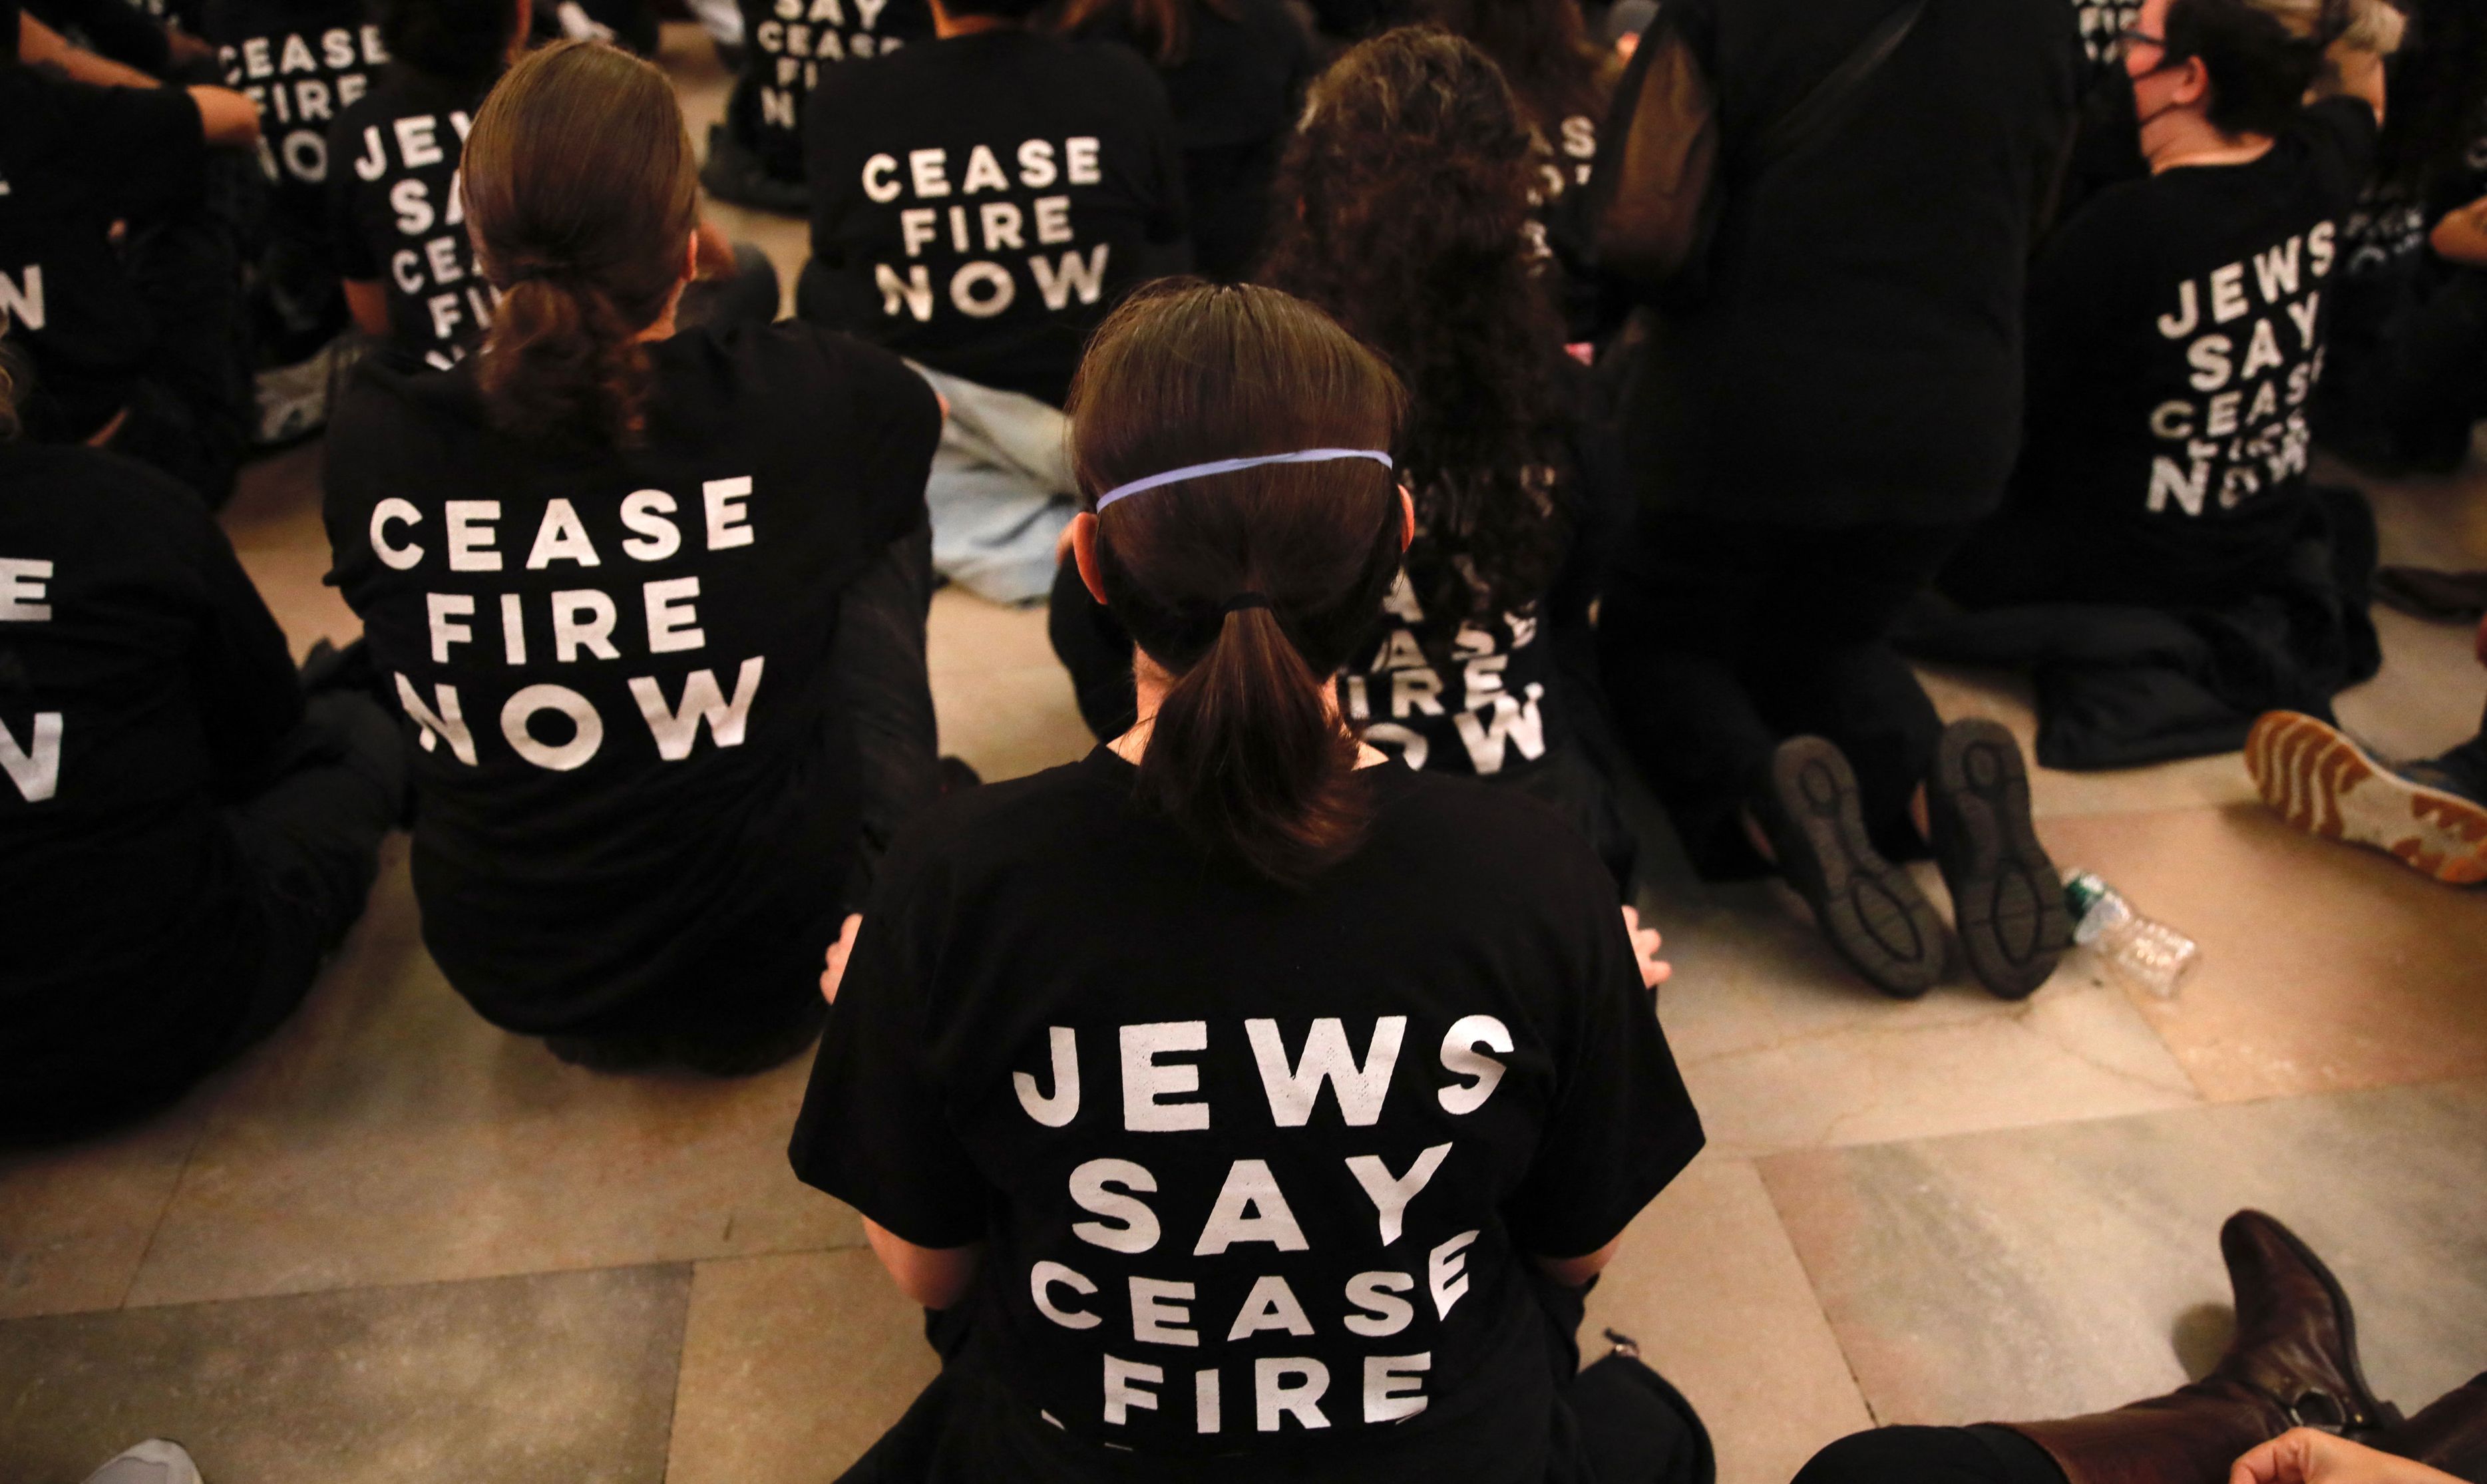 200 held as Jewish group shuts NYC's Grand Central calling for